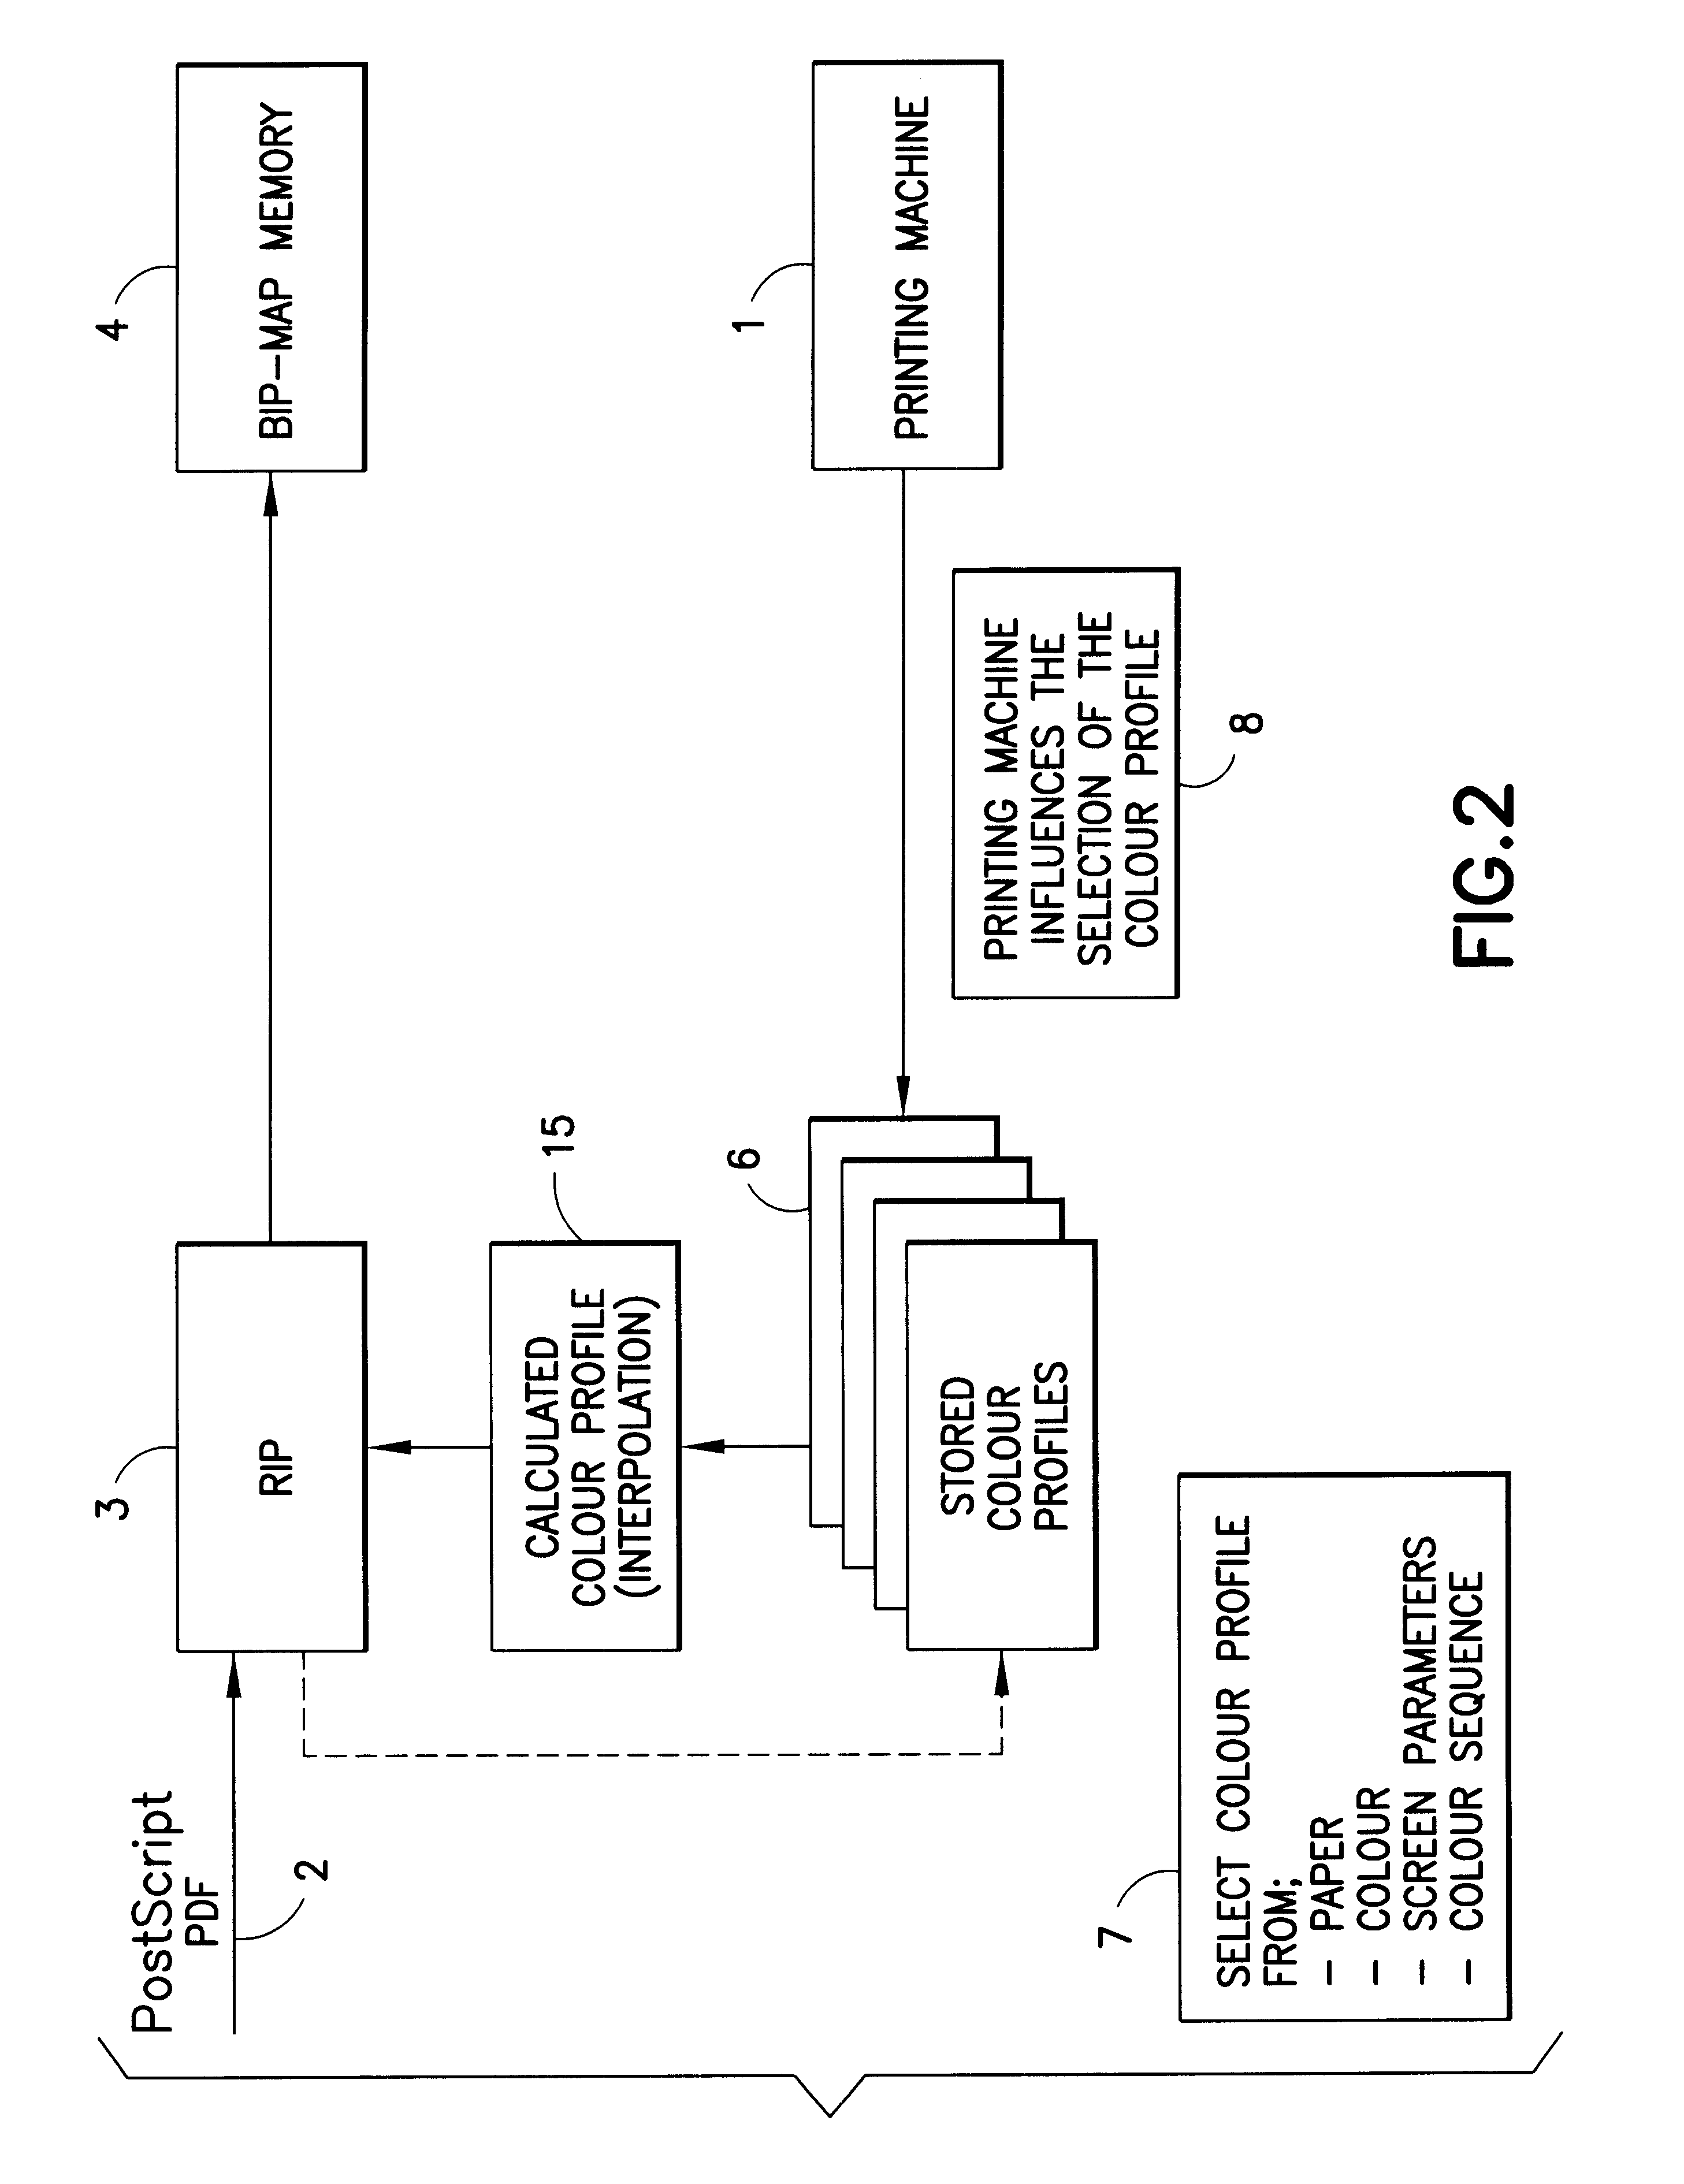 Method for profiling and calibrating a digitally controllable printing machine having a permanent printing plate